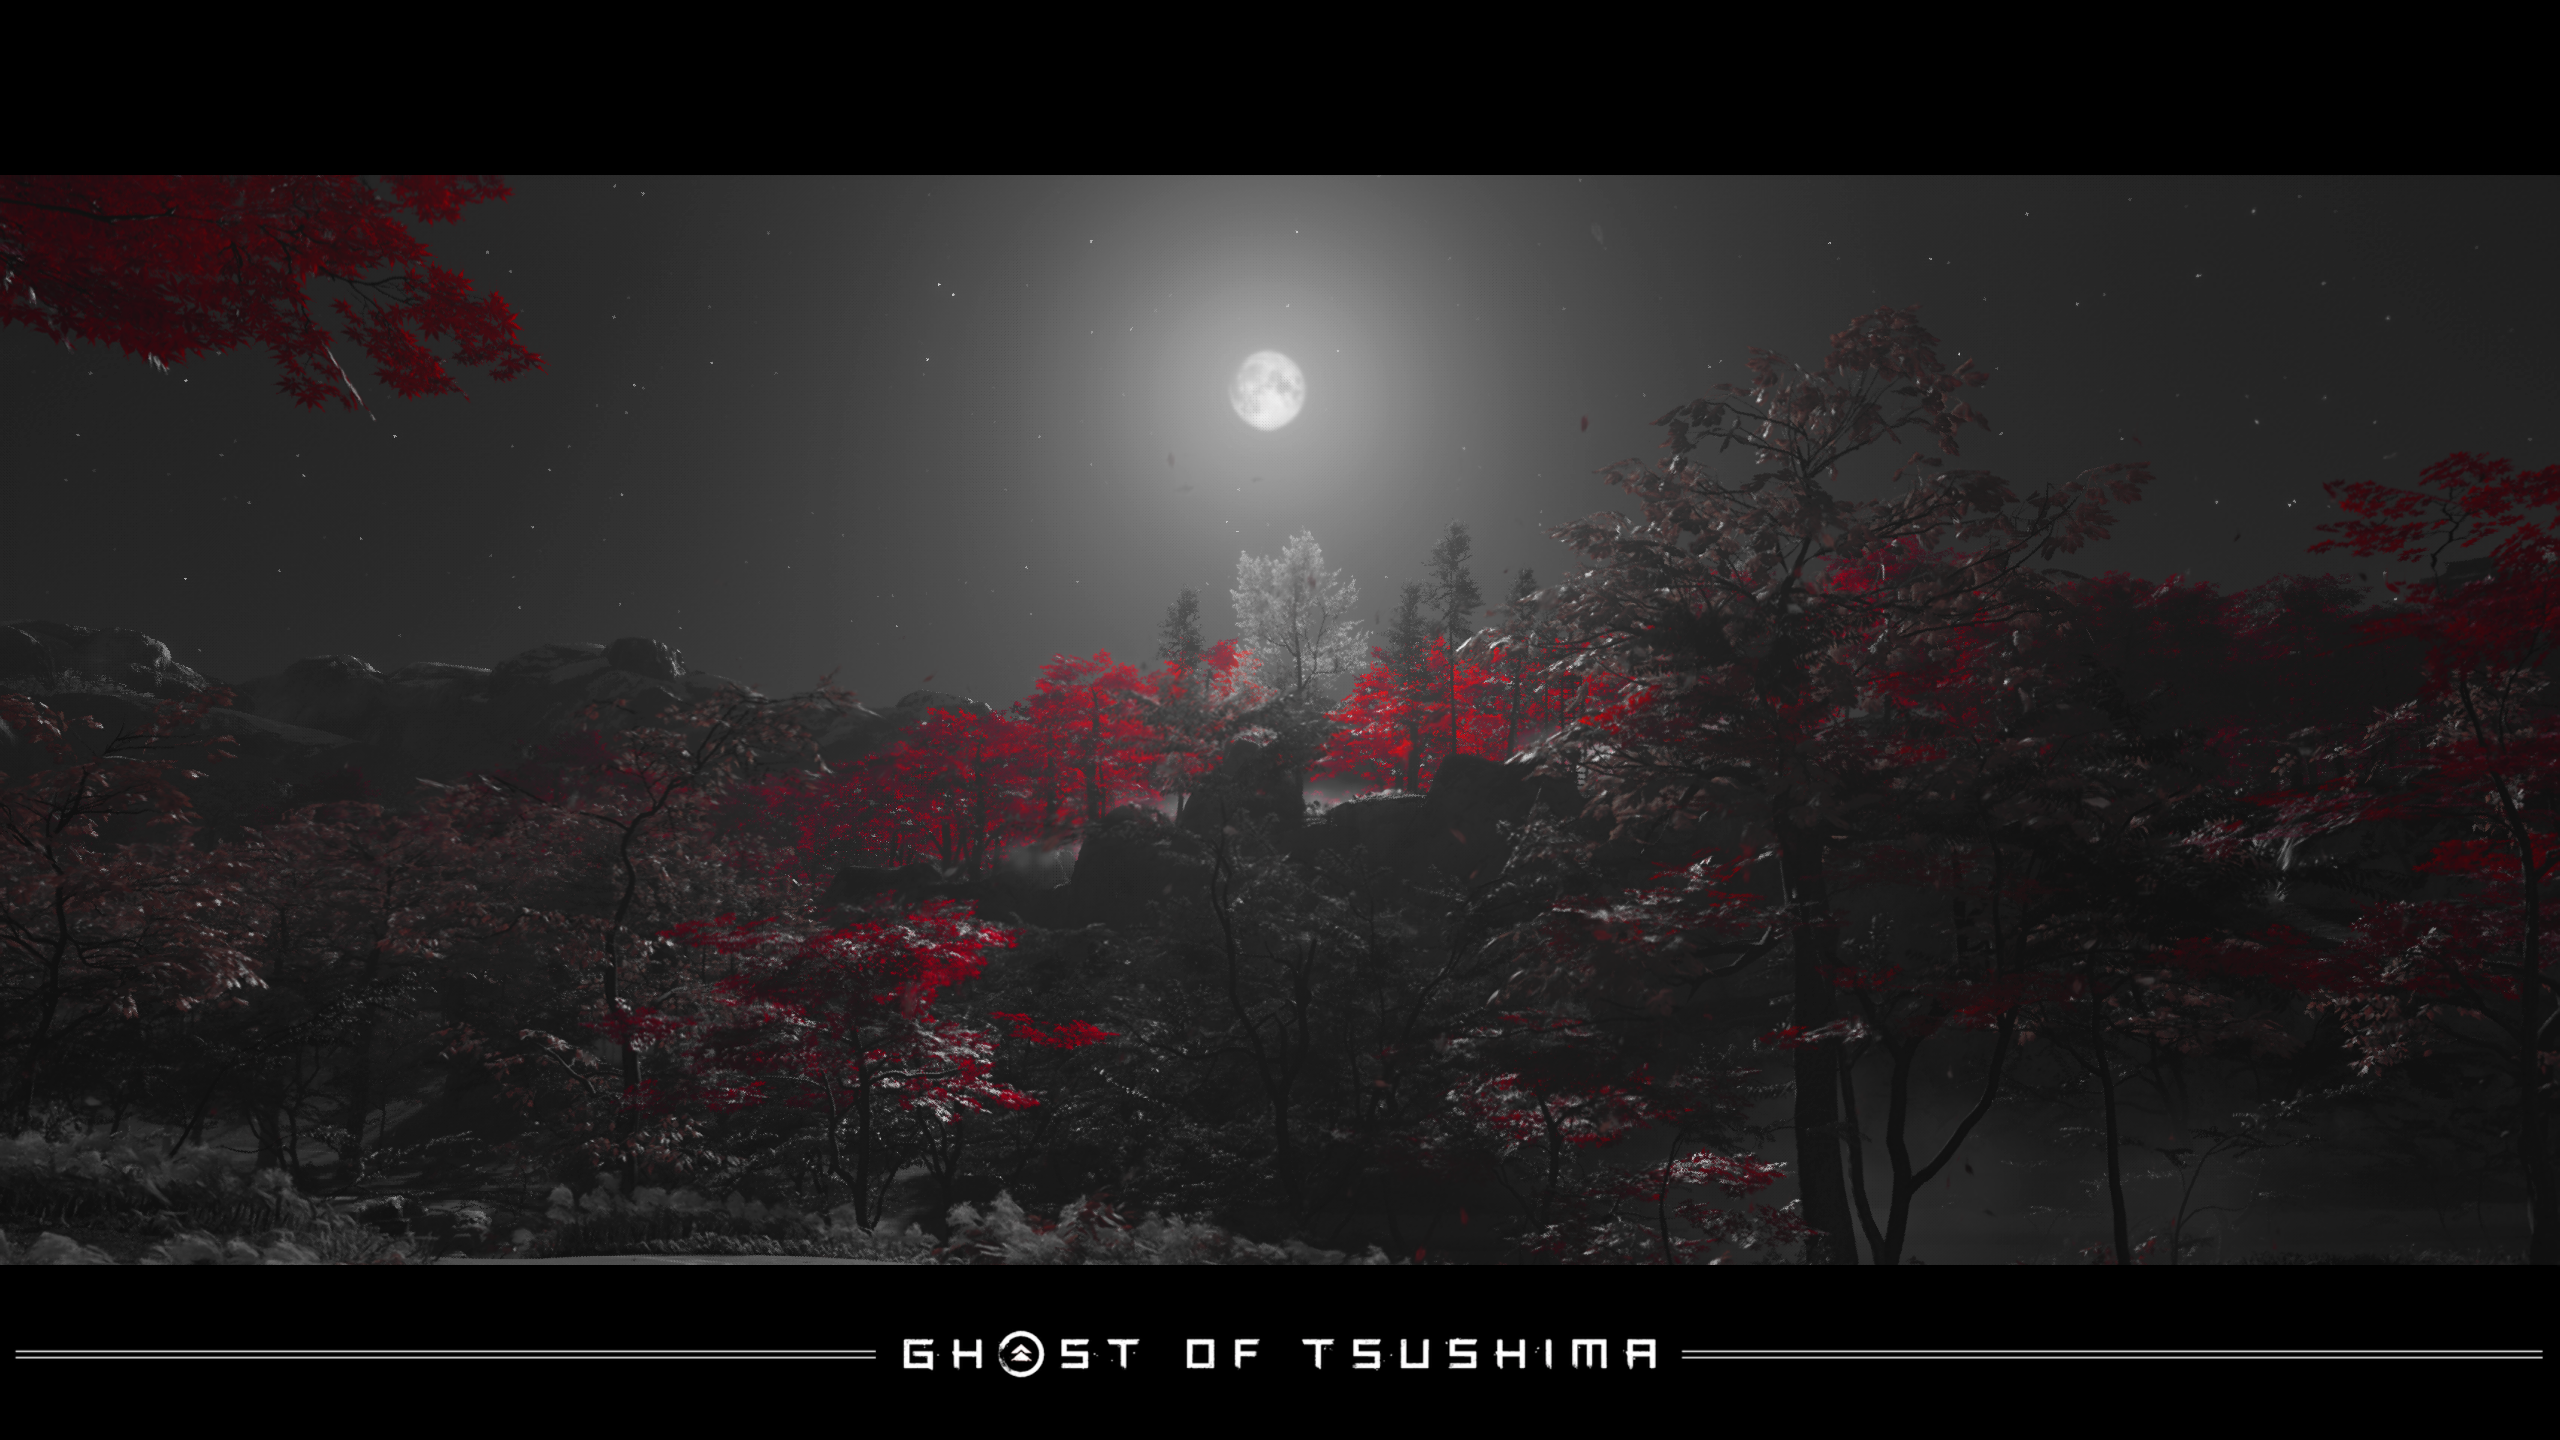 General 2560x1440 Ghost of Tsushima  nature night maple tree screen shot video games Sucker Punch Productions